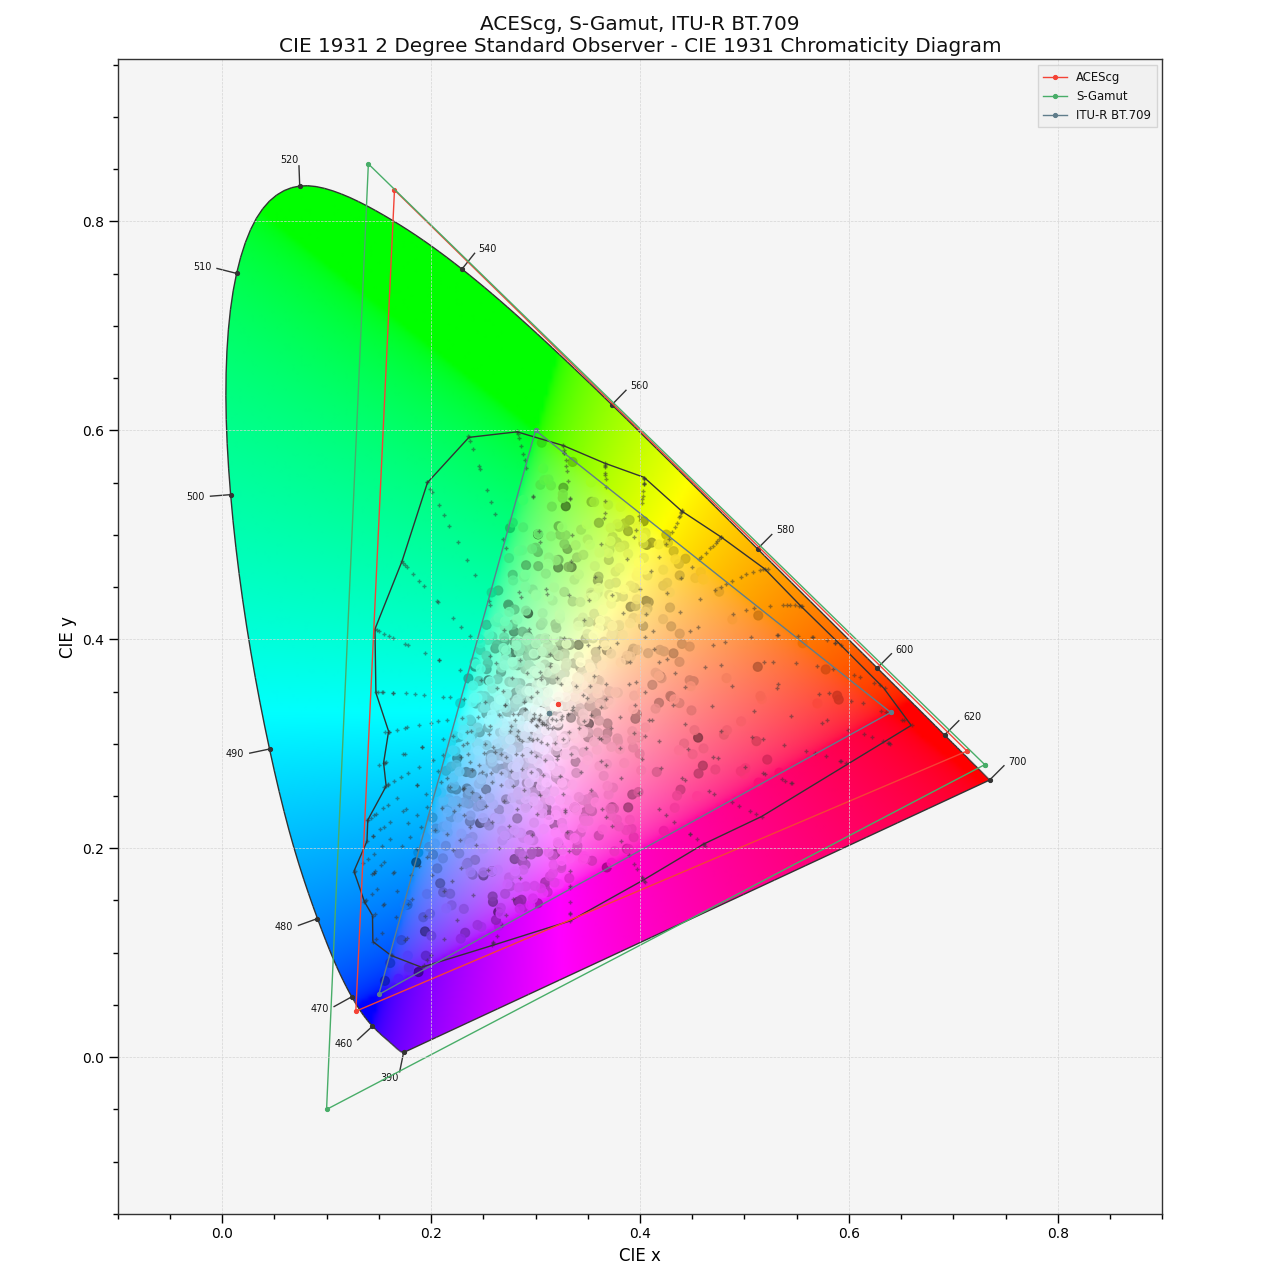 _images/Examples_Plotting_Chromaticities_CIE_1931_Chromaticity_Diagram.png